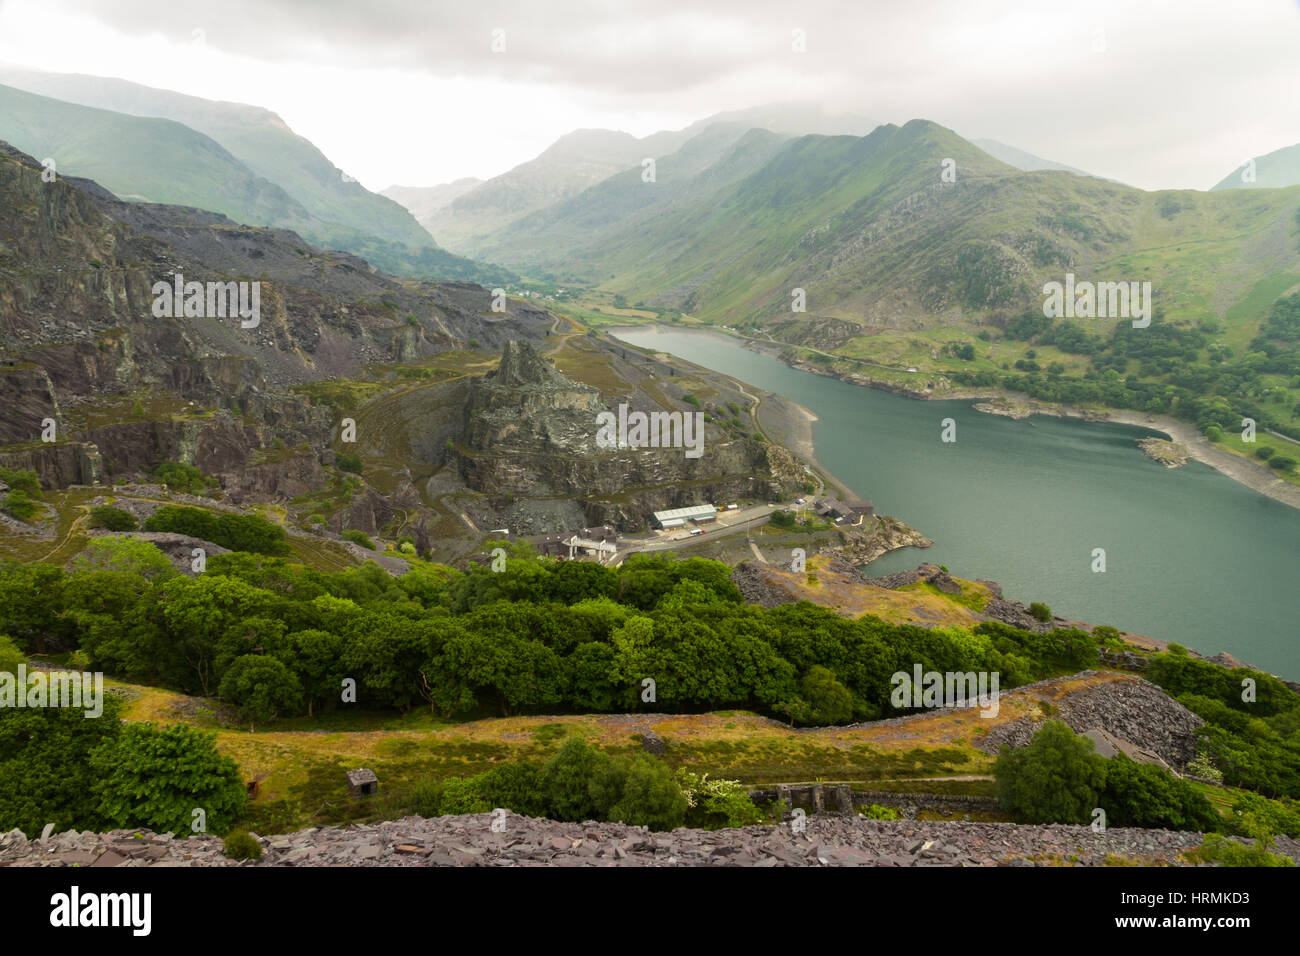 View from upper Dinorwig Slate Quarry over Llyn Padarn, Llanberis and the Nant Peris pass. Stock Photo